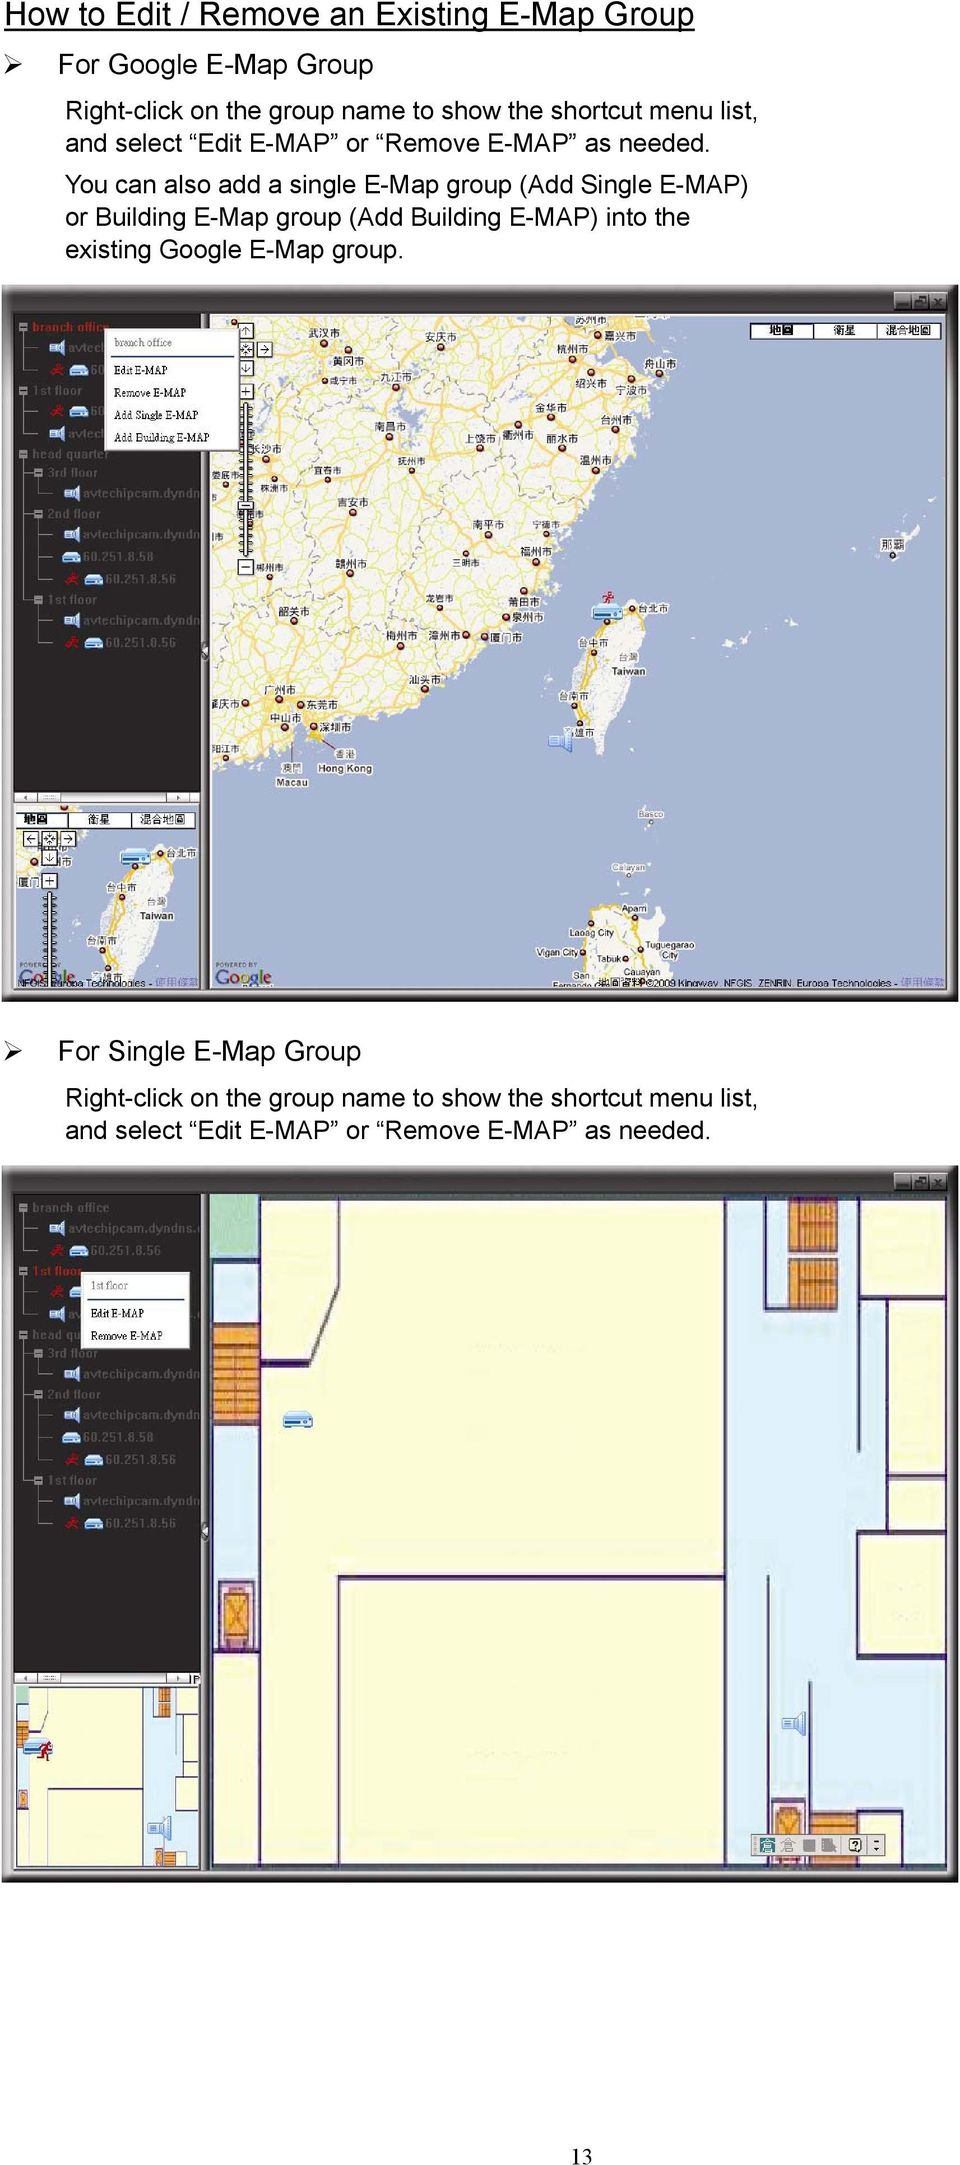 You can also add a single E-Map group (Add Single E-MAP) or Building E-Map group (Add Building E-MAP) into the